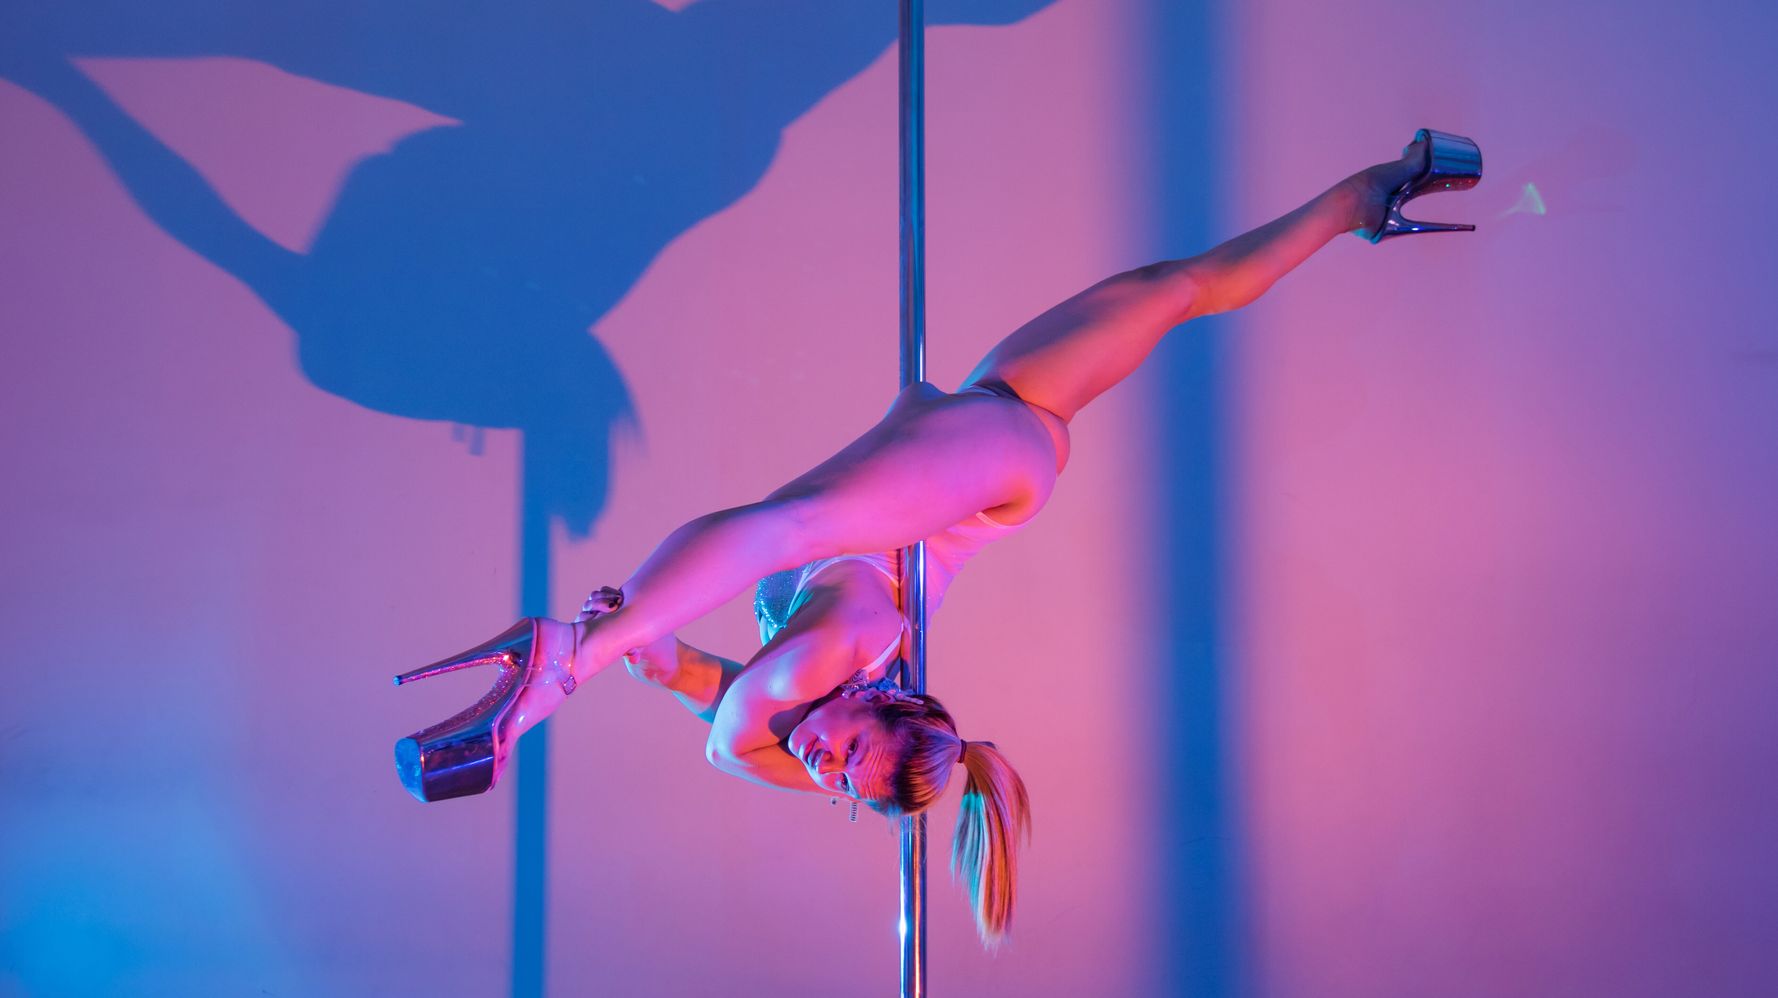 Pole Dance - When I Was Outed For My Porn Past, Pole Dancing Helped Me Heal | HuffPost